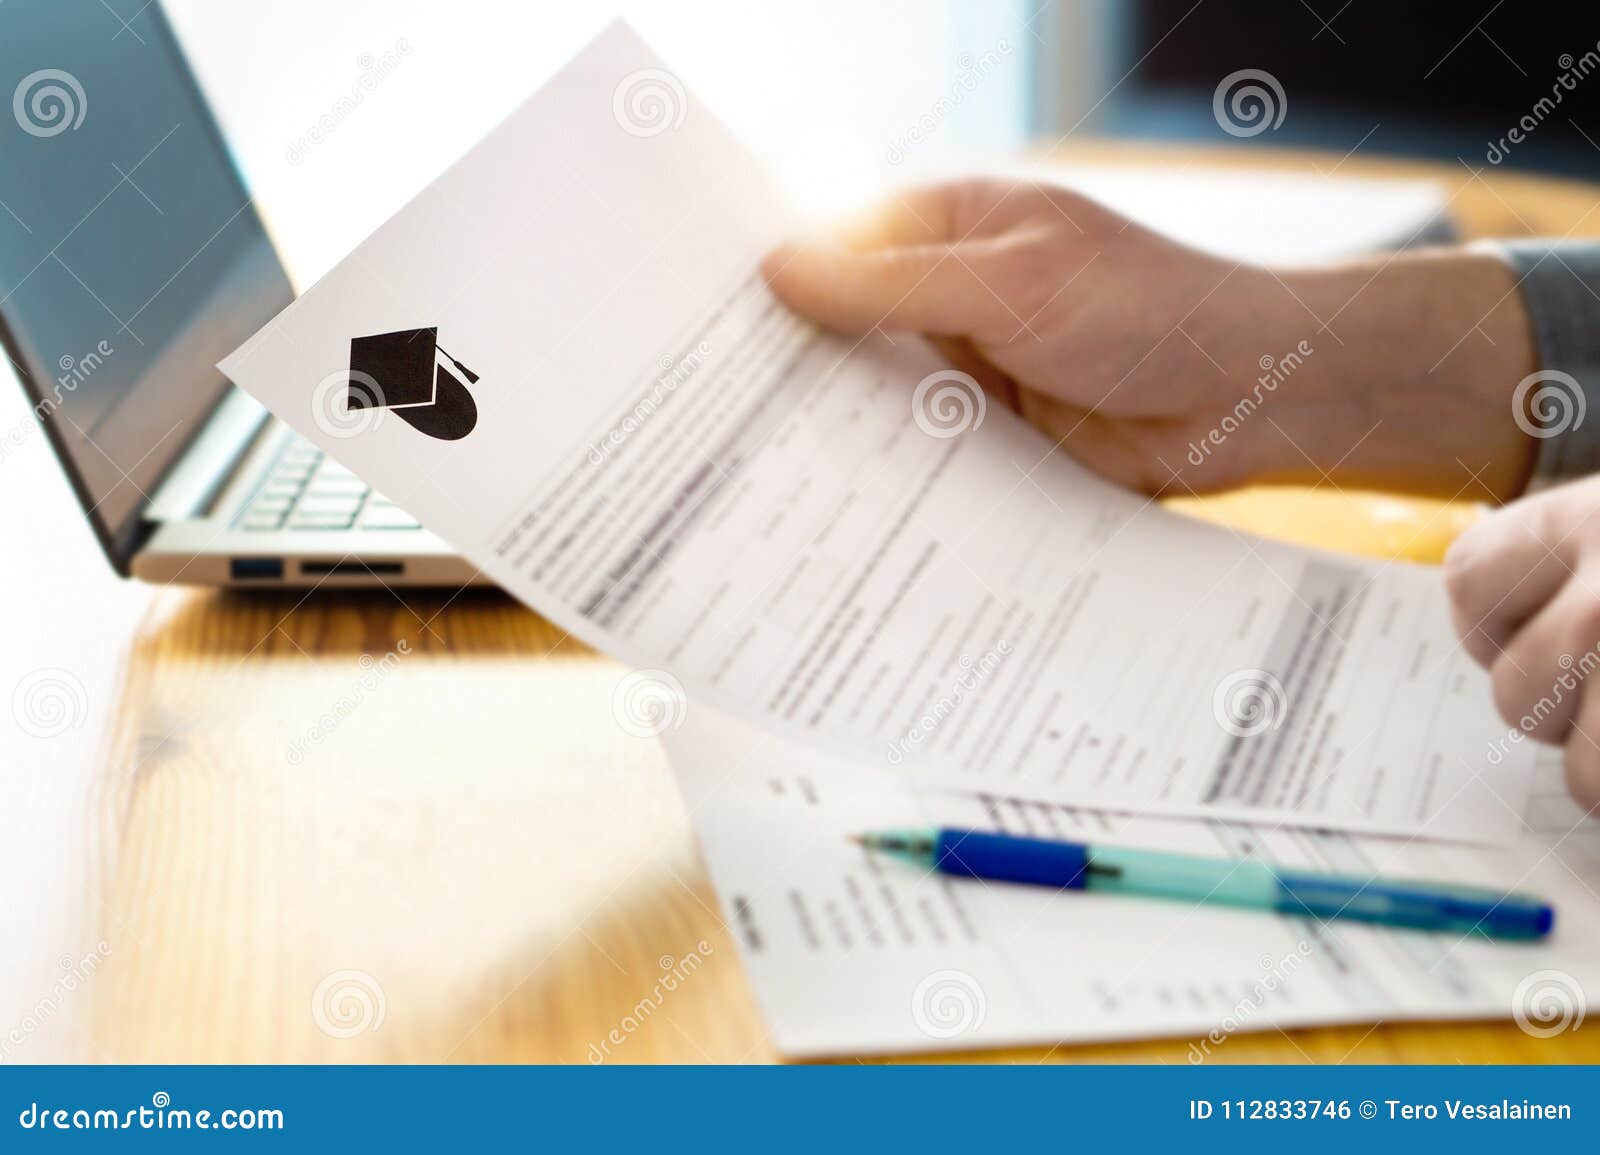 man reading college or university application or document.